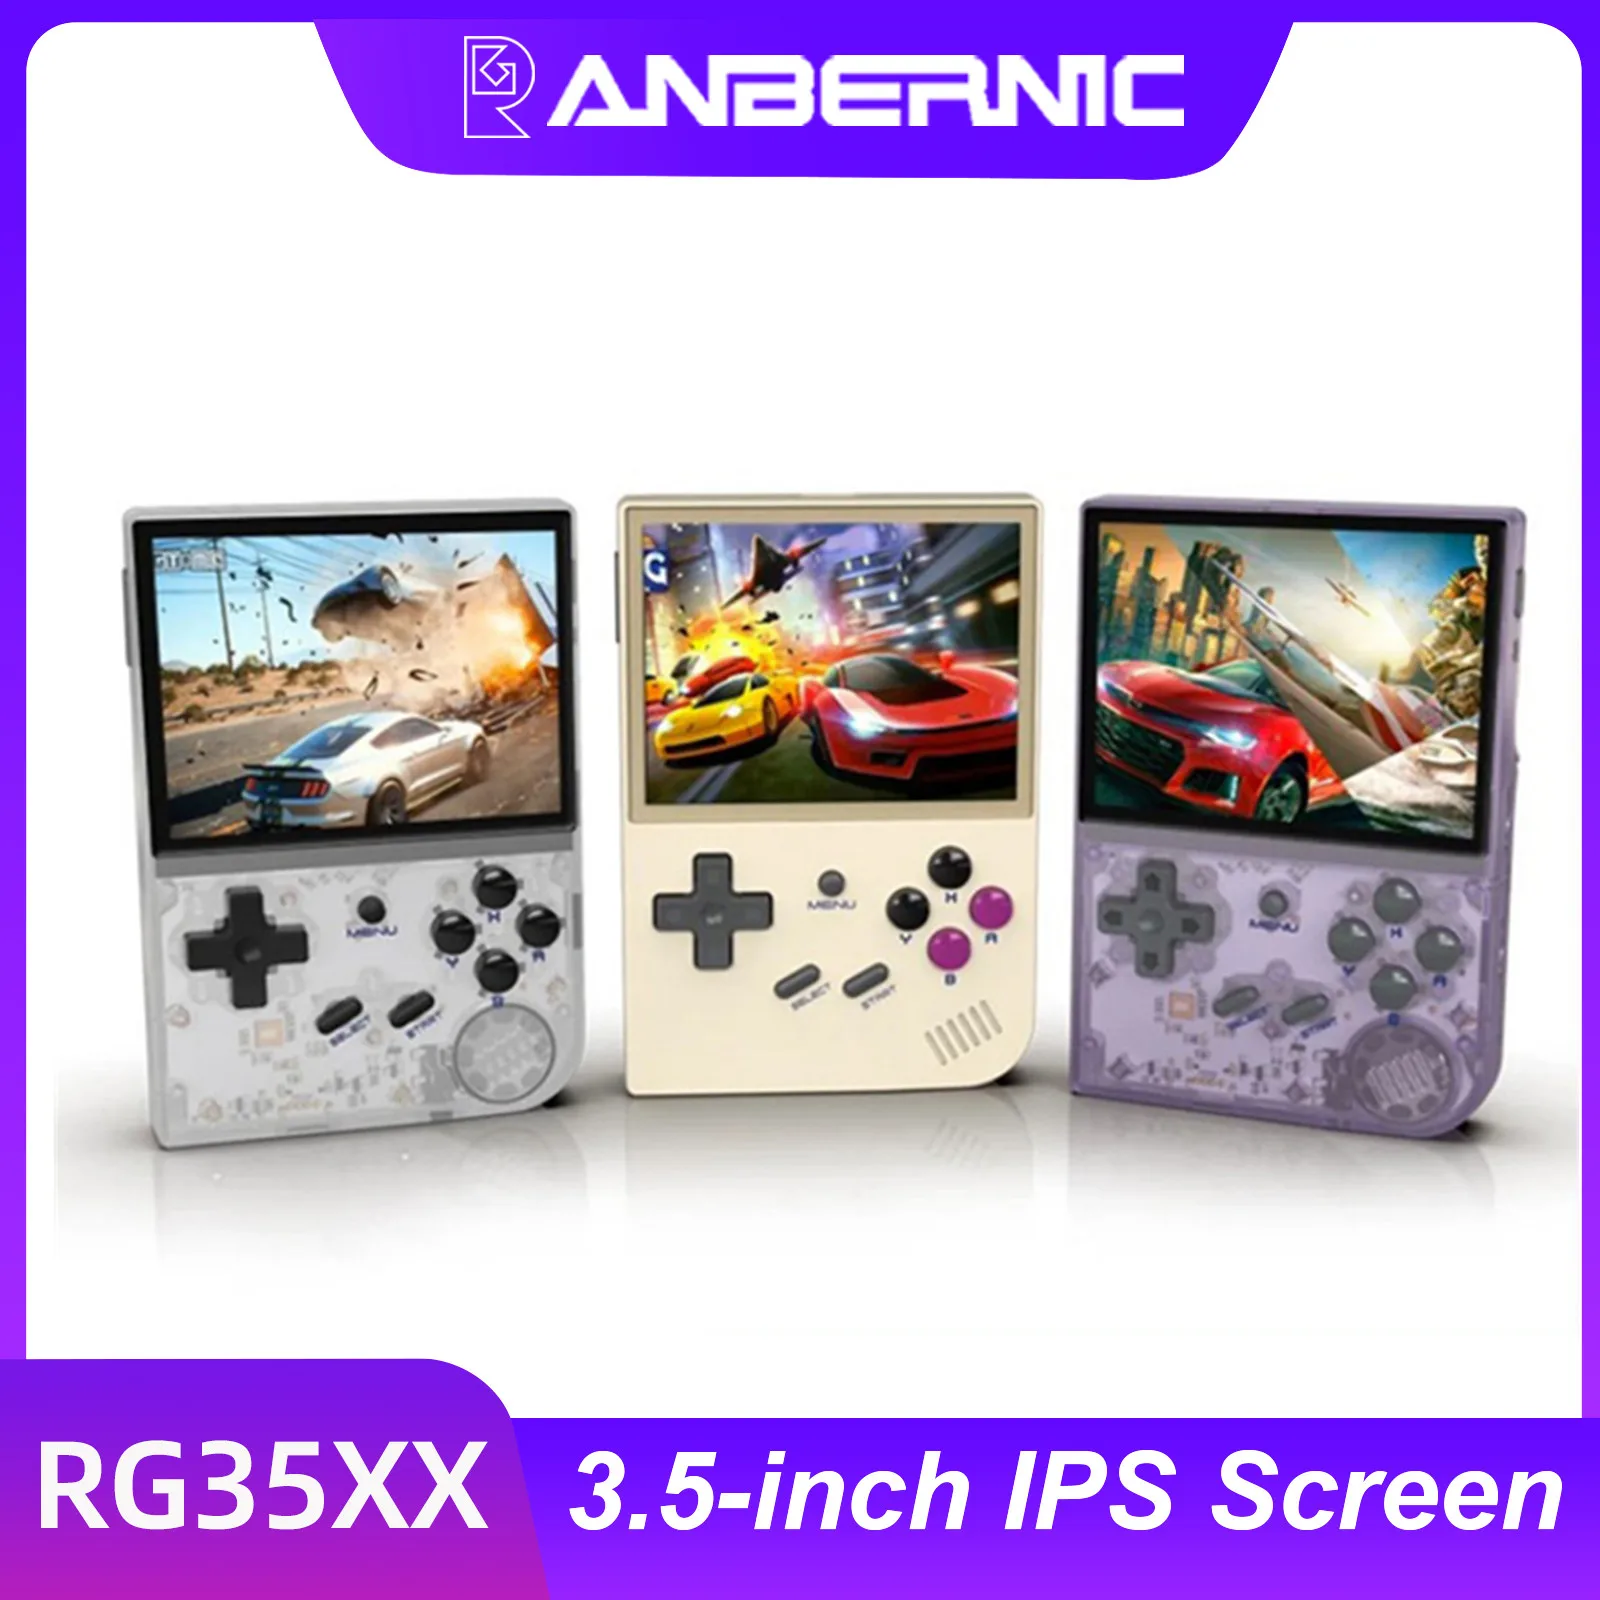 ANBERNIC RG35XX Retro Handheld Game Console Linux System 3.5 Inch IPS Screen Cortex-A9 Portable Pocket Video Player